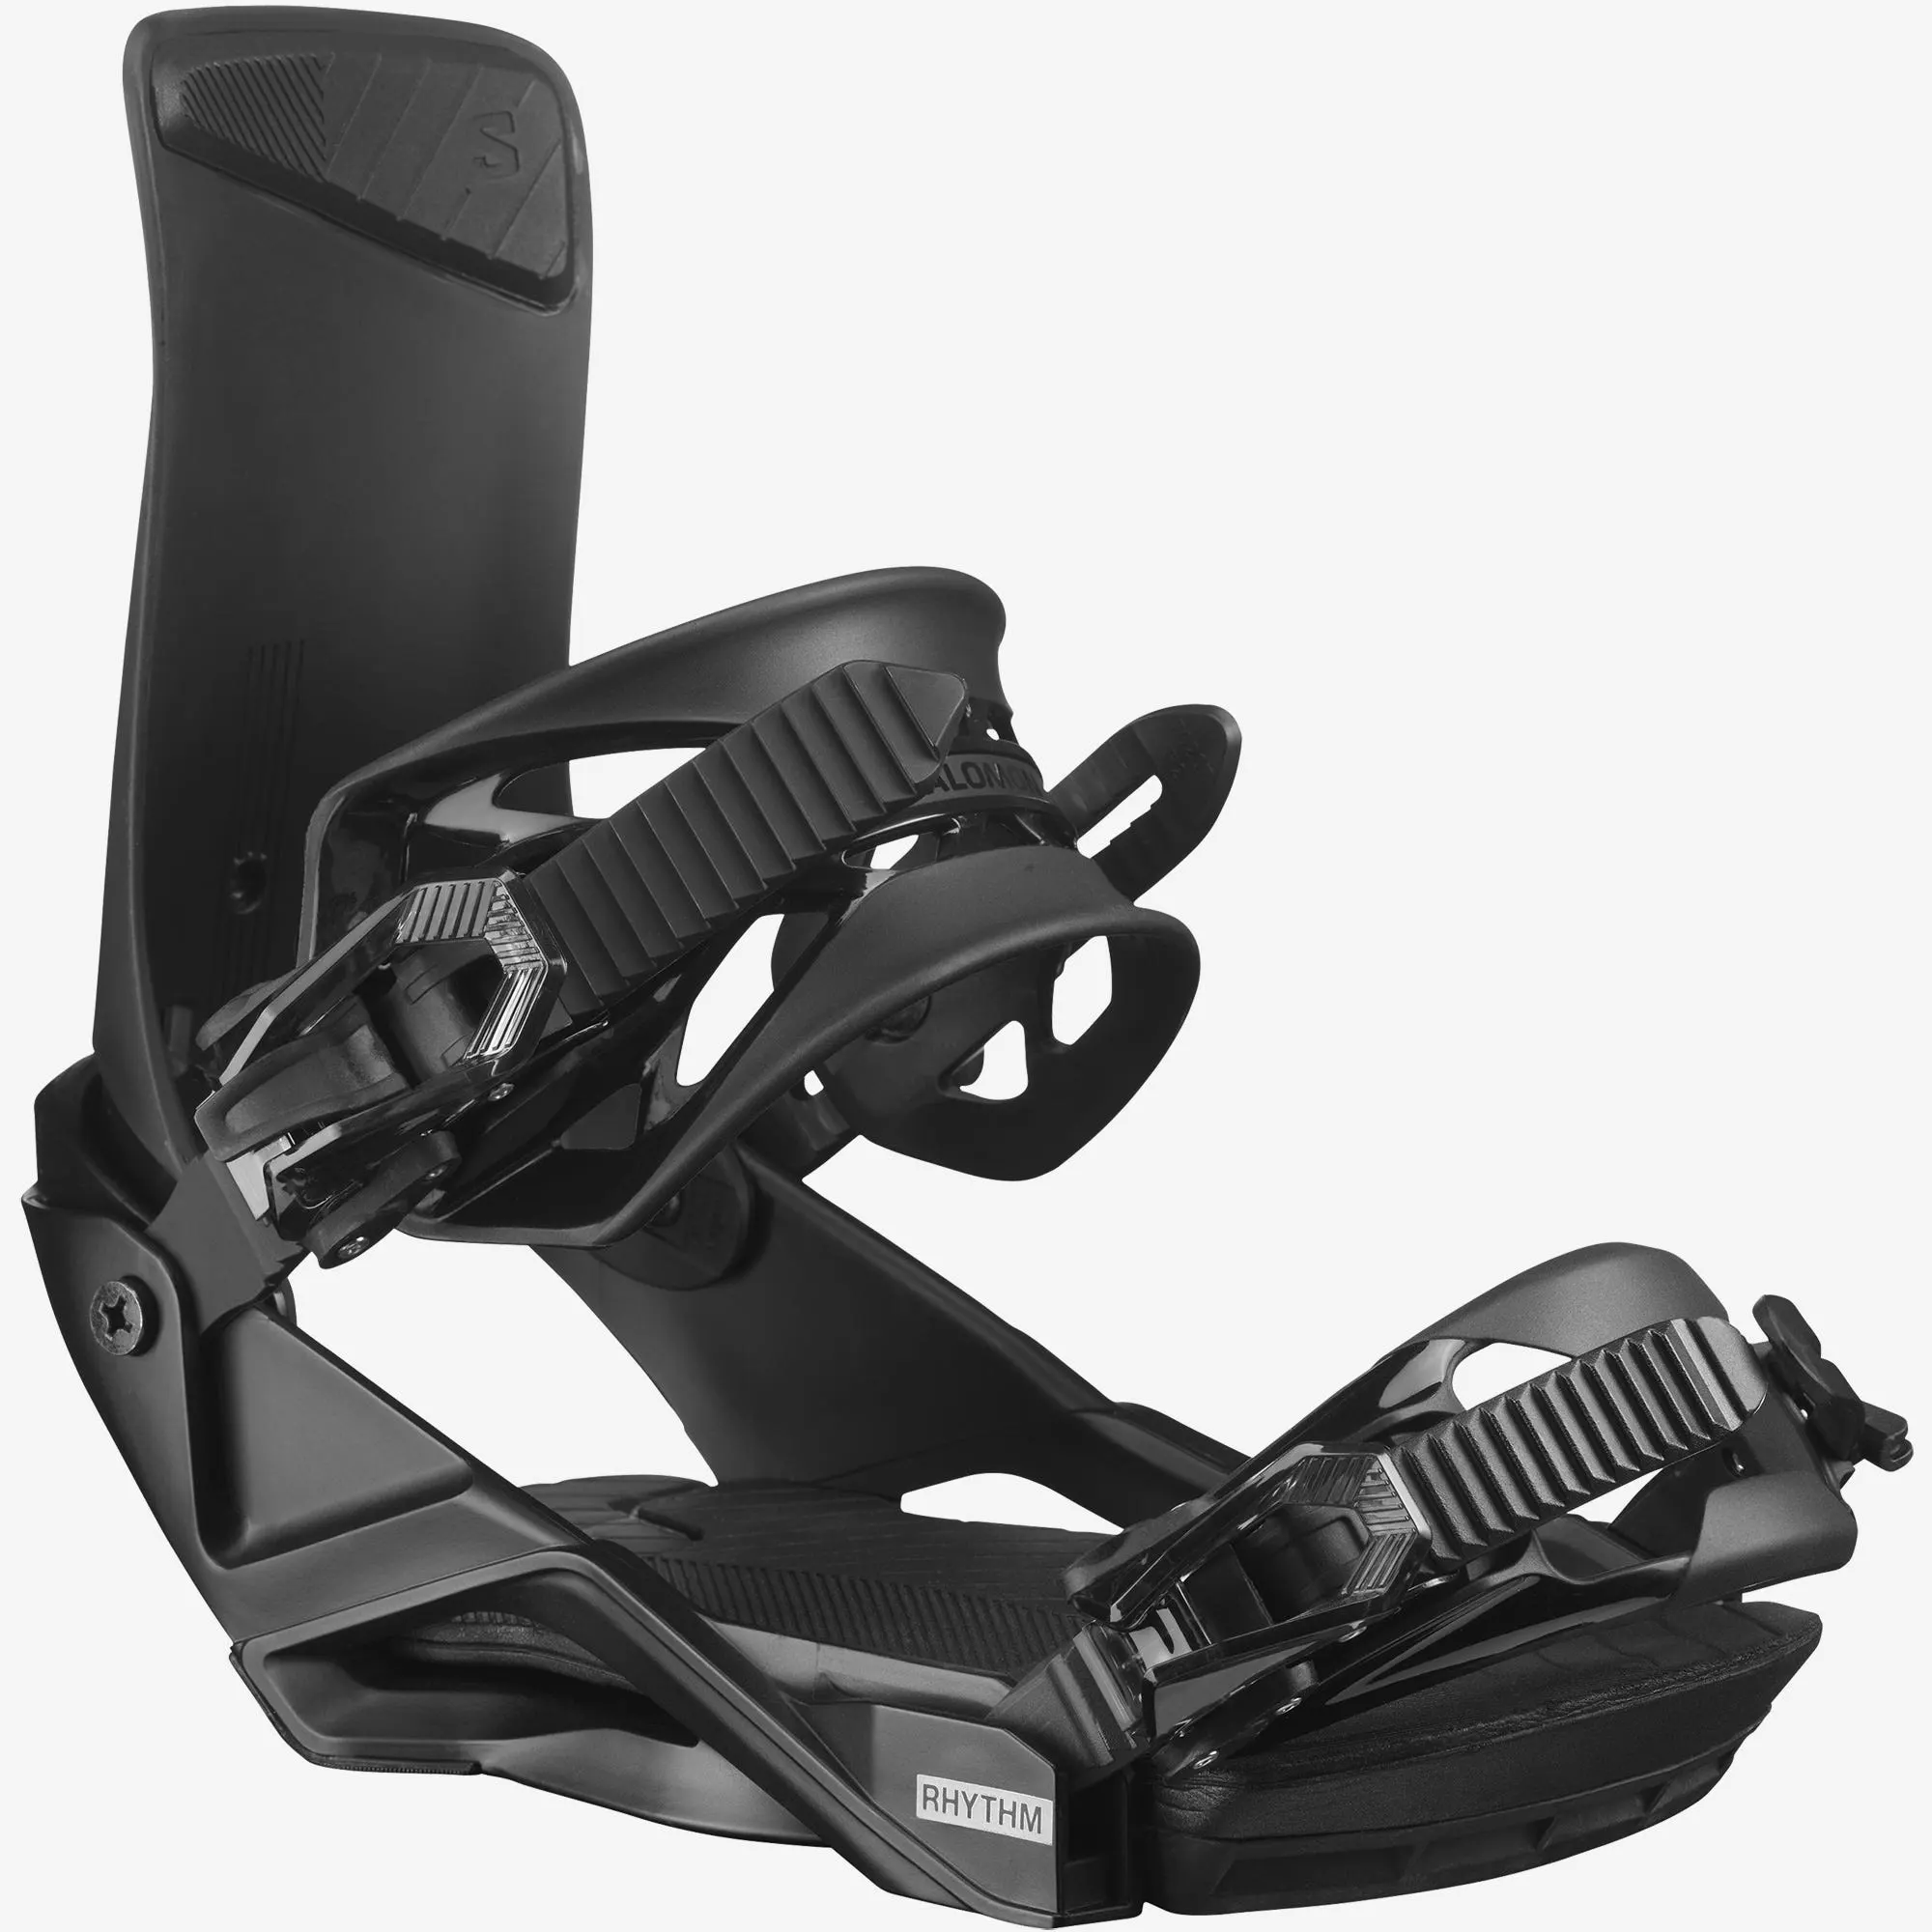 The Rhythm binding is loaded with features to provide superior fit and comfort in all conditions. Built for the rider with progression in mind, this binding features a lightweight asymmetrical design providing the perfect balance of support and maneuverability. A laundry list of features offers enhanced comfort and easy adjustments on the go.